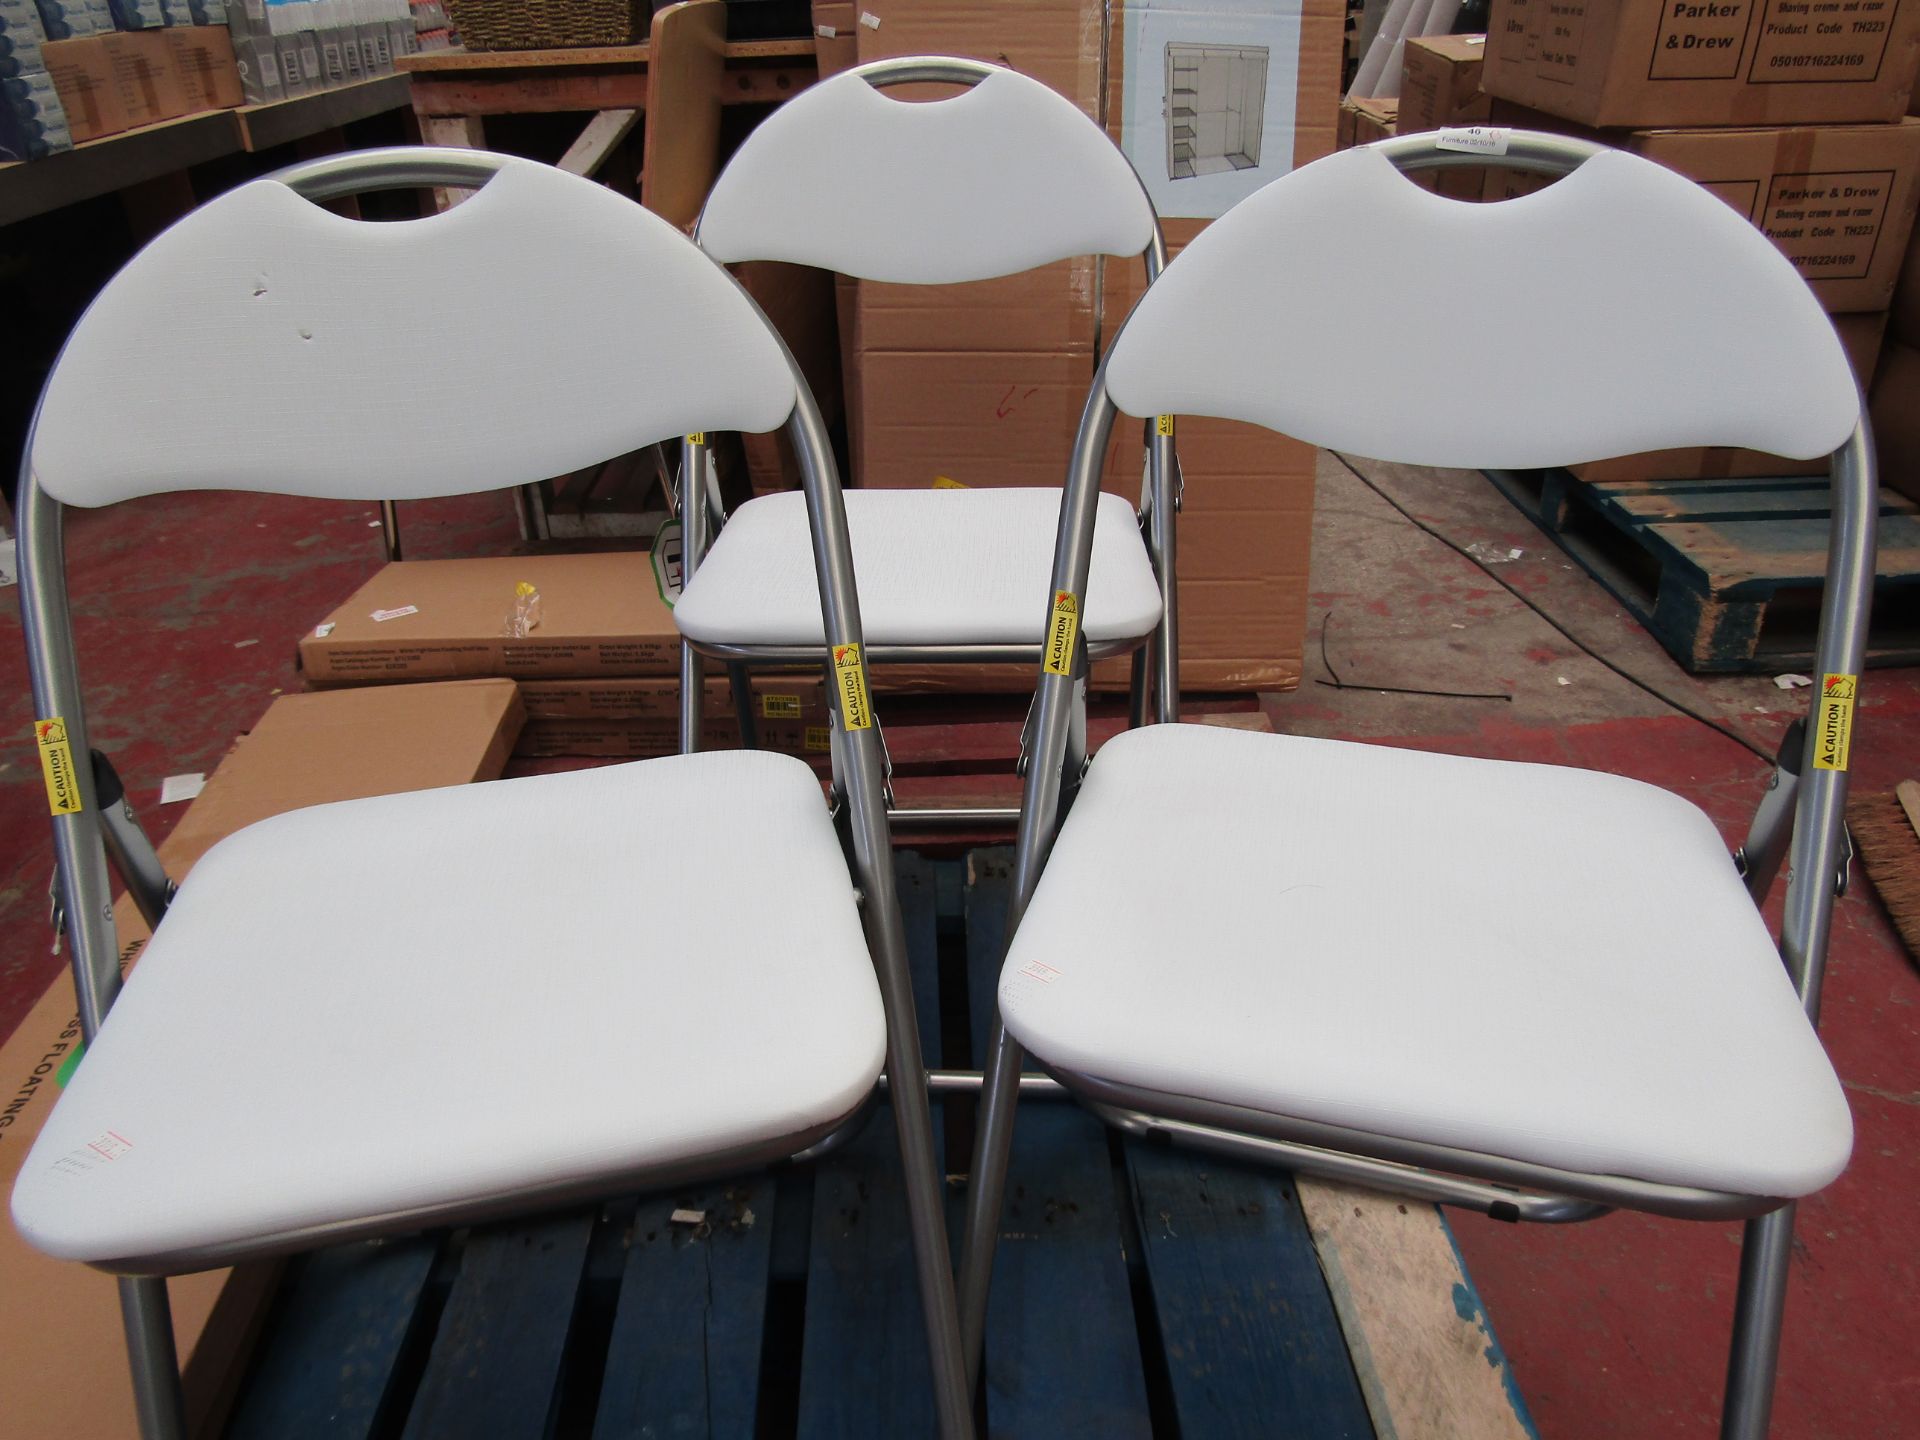 3 x Great Value Padded Folding Office Chair - White. Overall size H79, W44.5, D48cm. Two Chairs have - Image 2 of 2